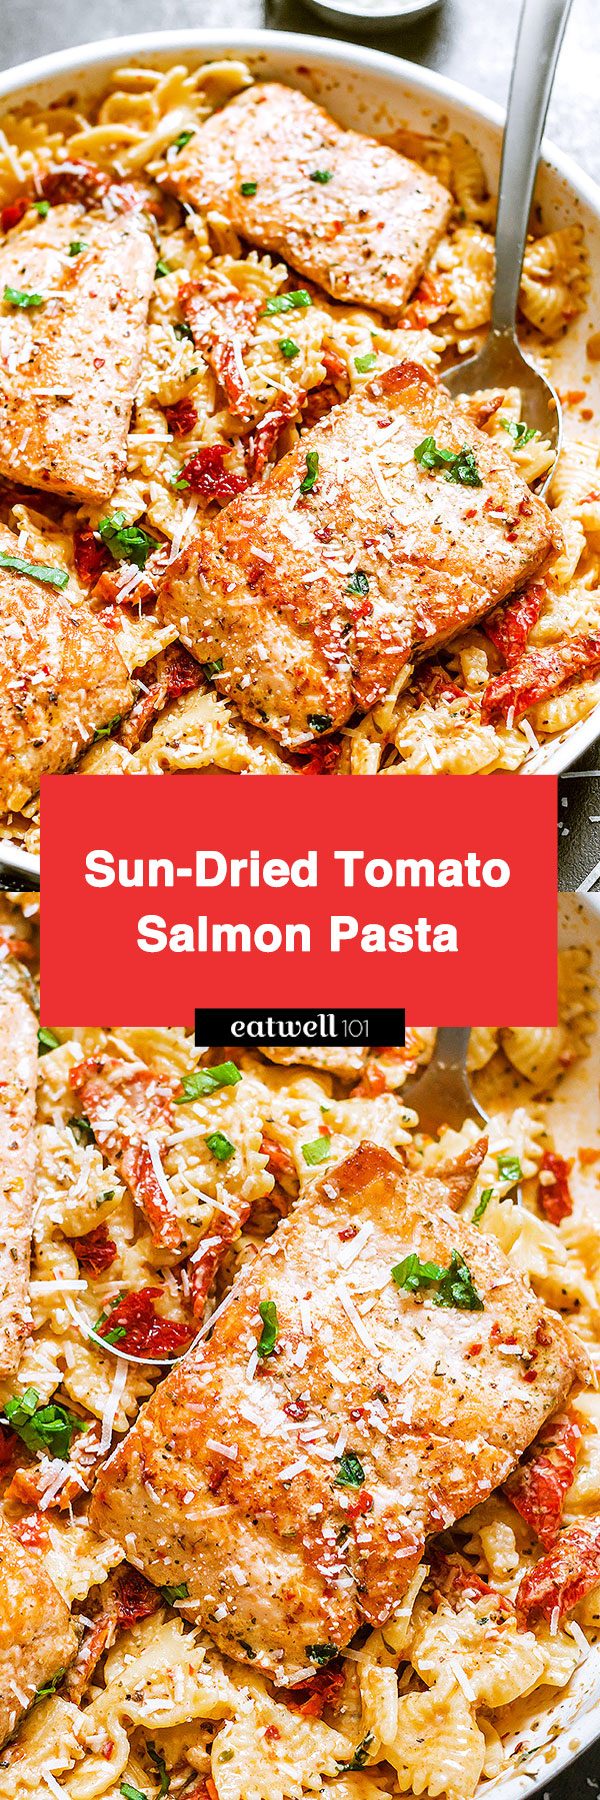 Creamy sun-dried tomato salmon pasta - #slamon #pasta #recipe #eatwell101 - A nourishing seafood dish ready in under 20 minutes and perfect for busy nights.